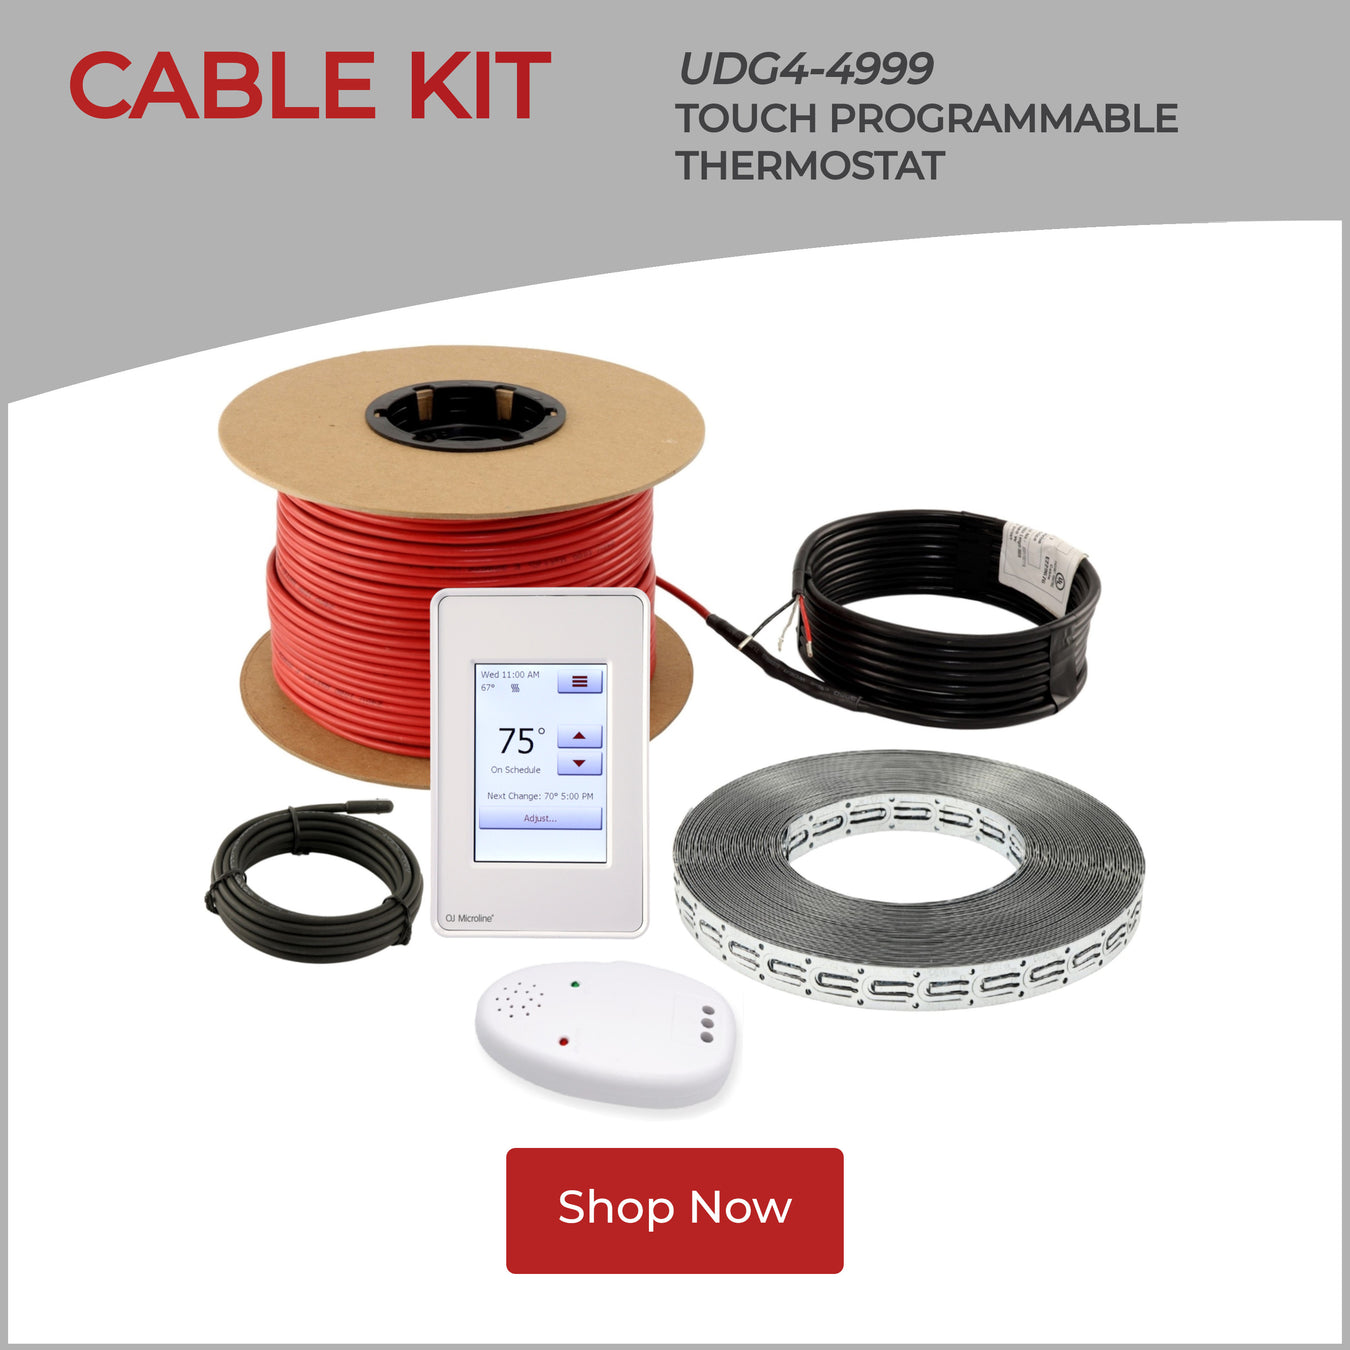 Overview_-_Cable_Kit_with_UDG4_Strapping